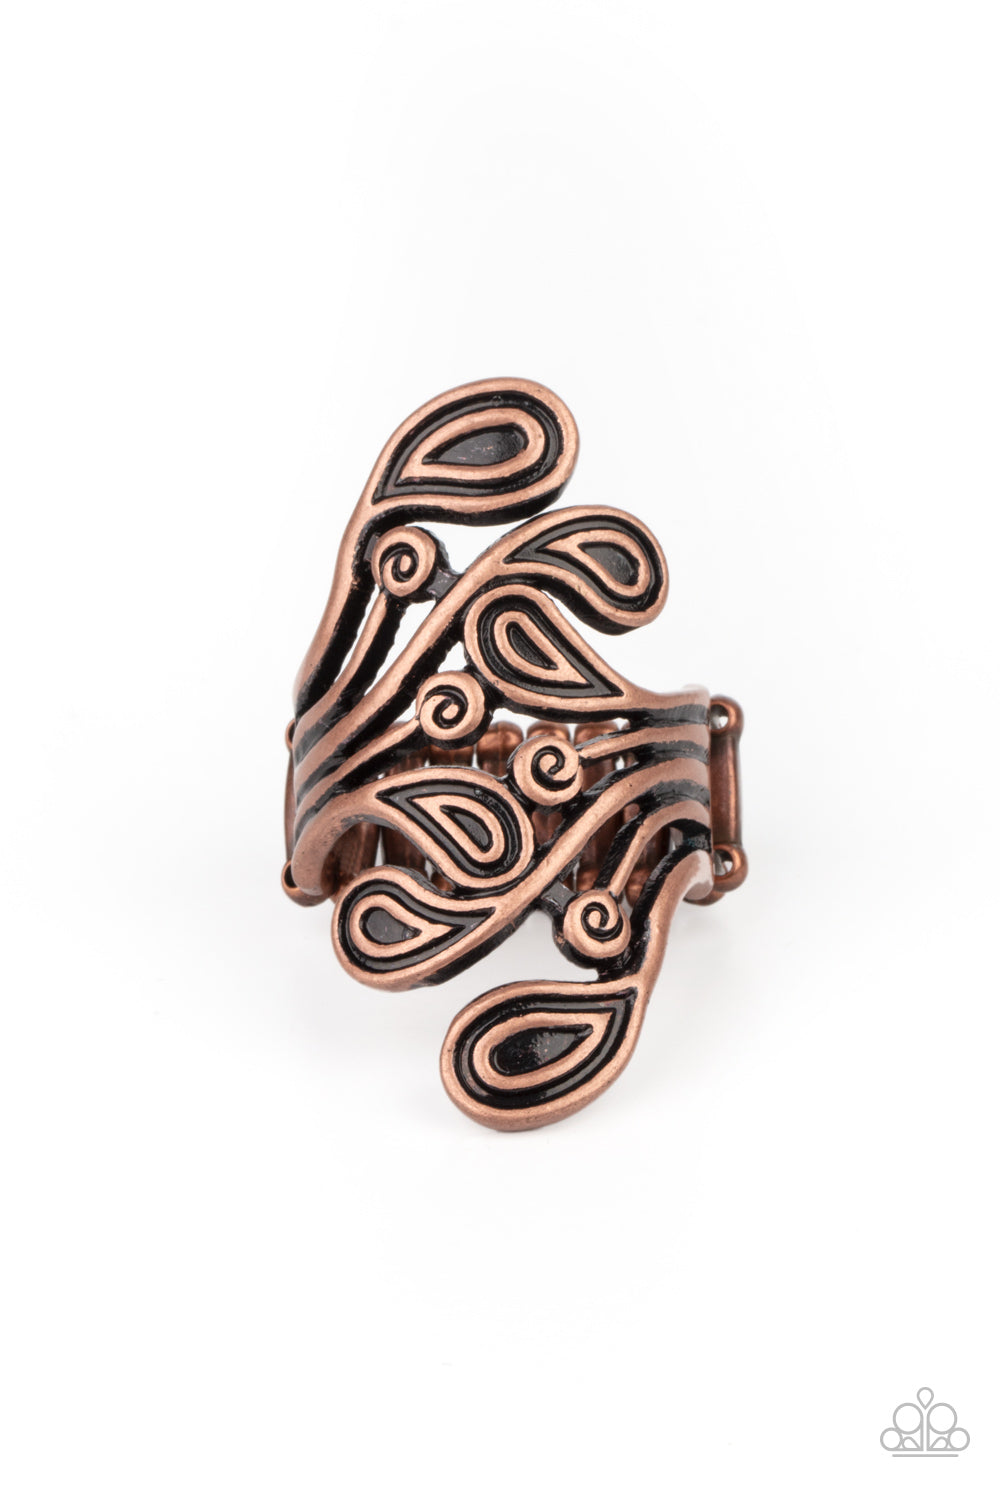 FRILL In The Blank - Copper ring